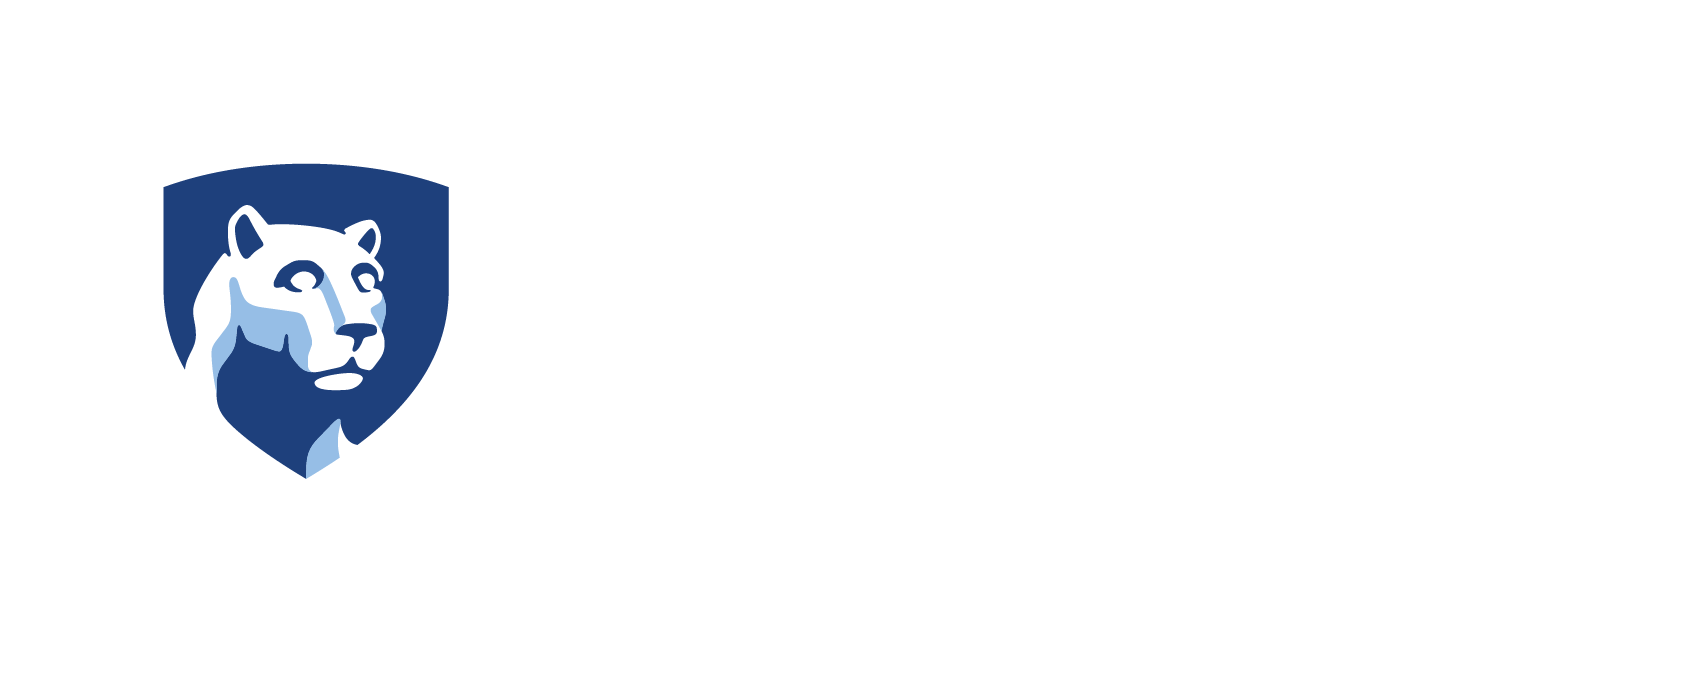 Penn State Lion Shield and Office of the Vice President for Research wordmark